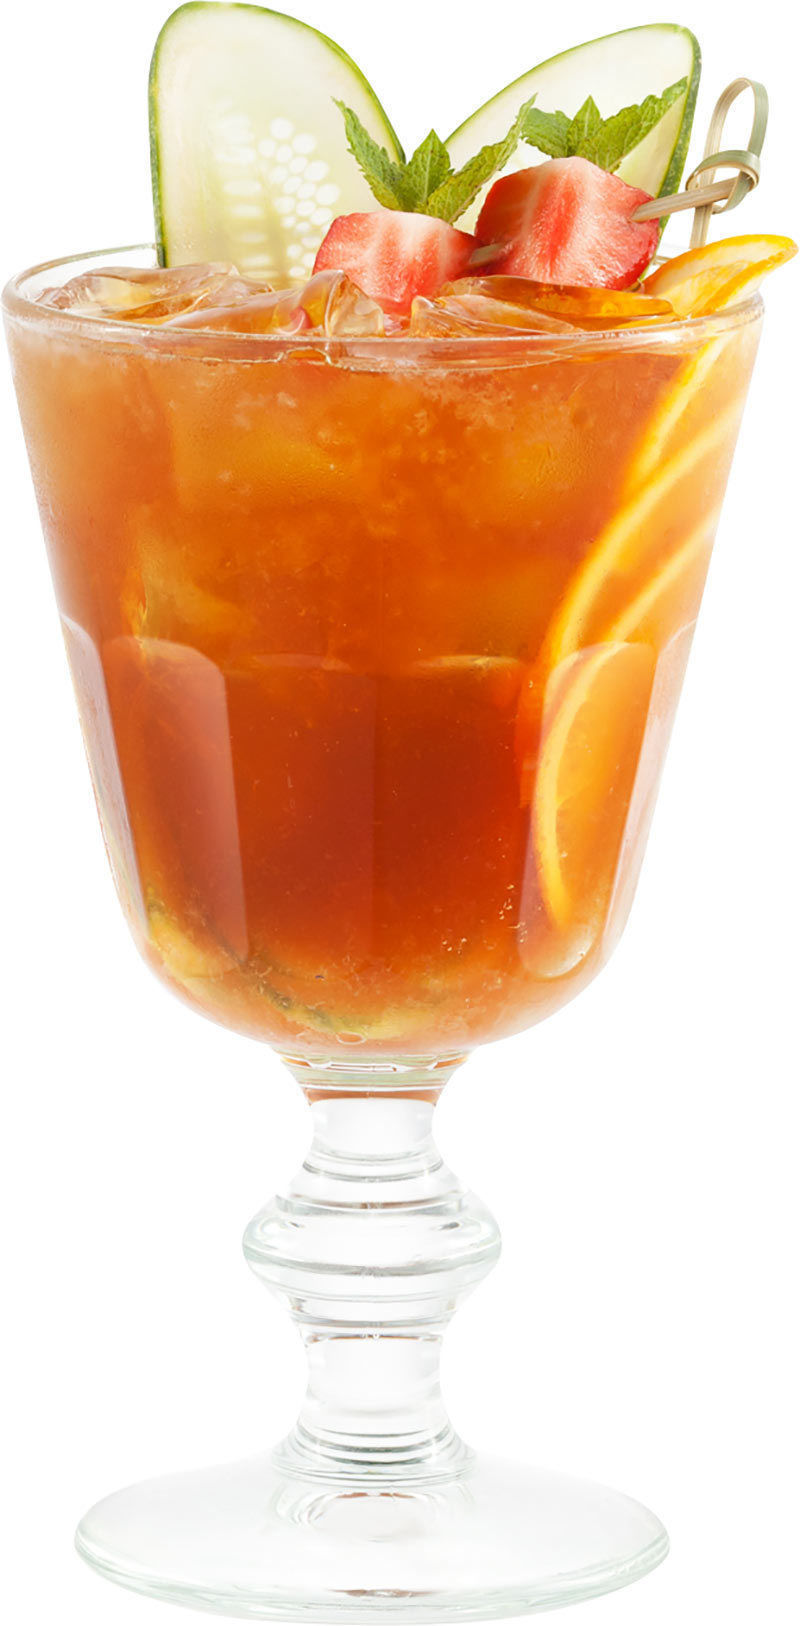 How to Make the Pimms No. 6